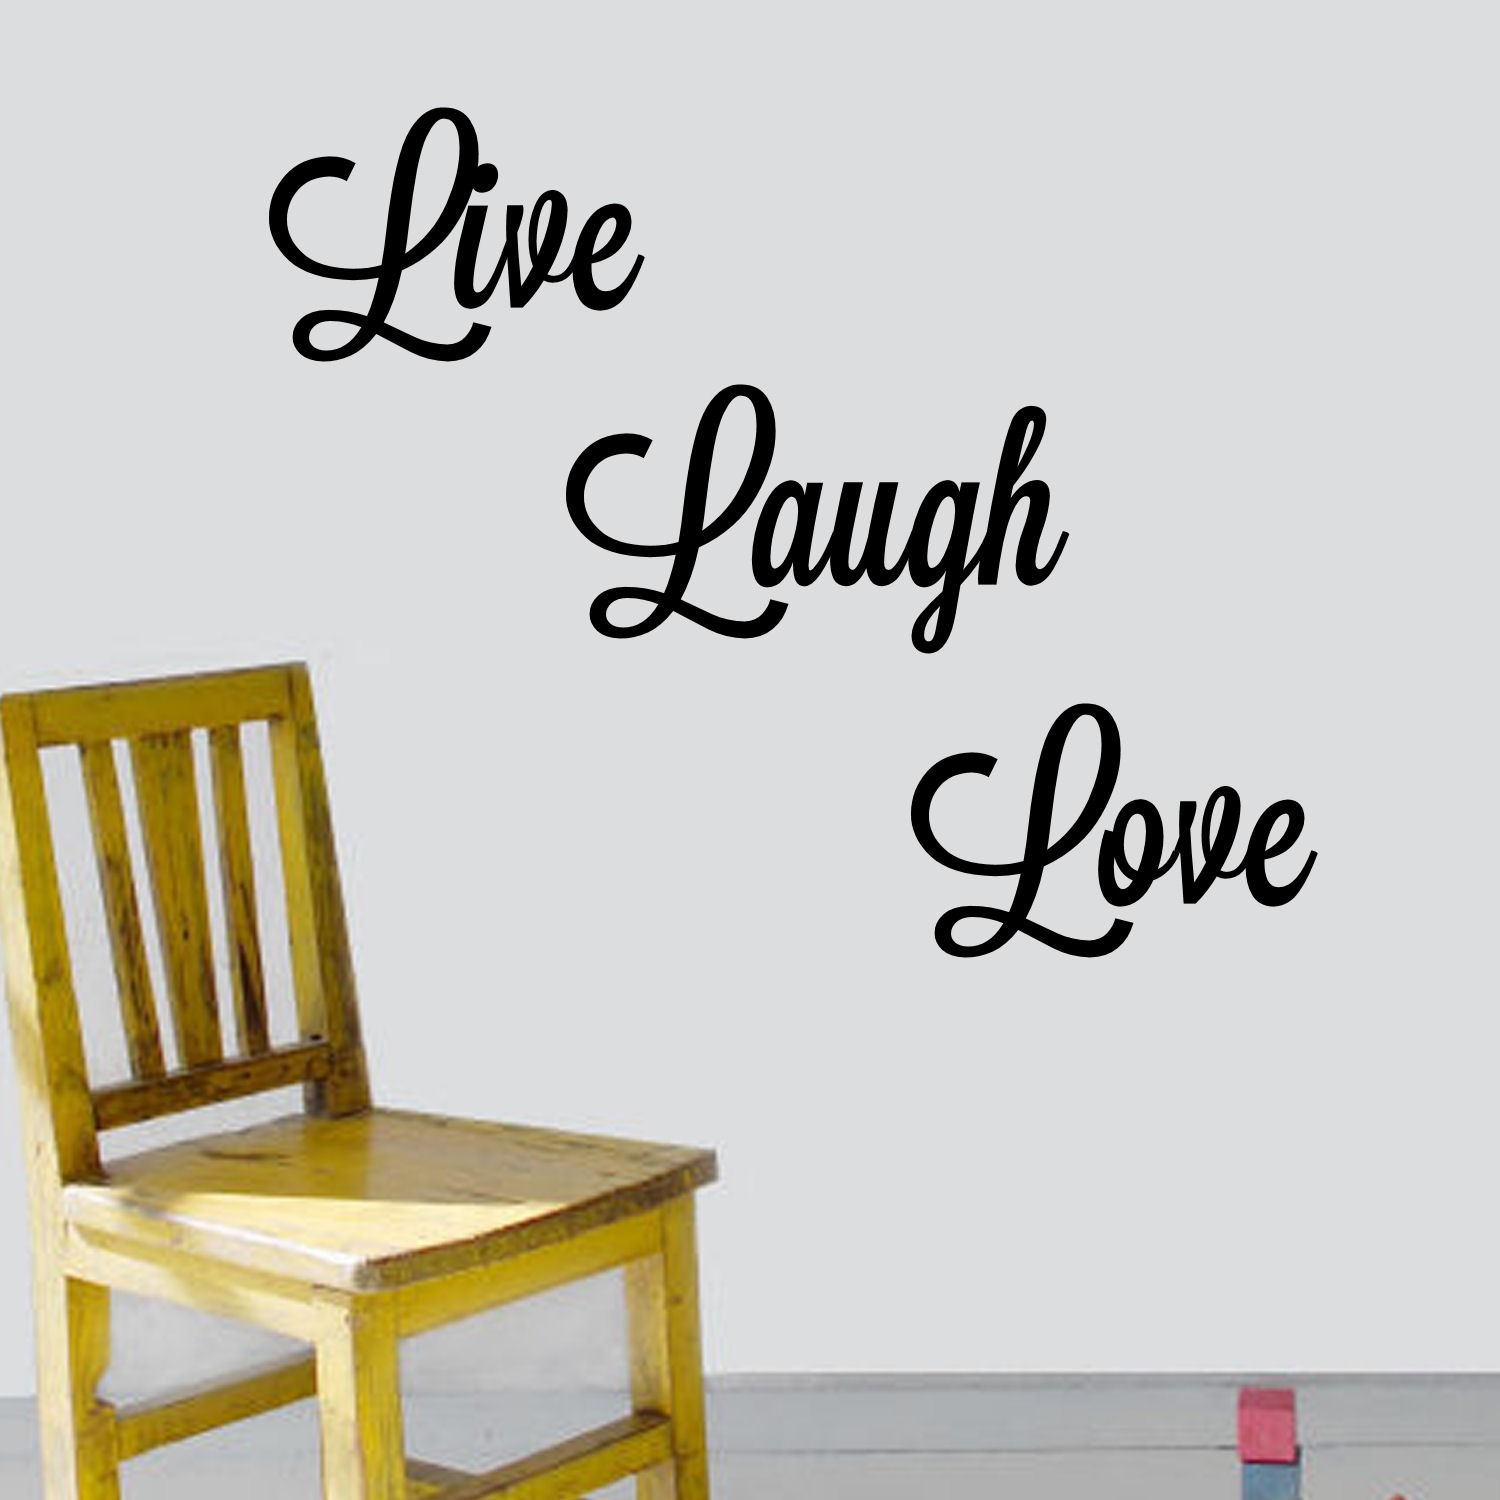 wall decals live love laugh